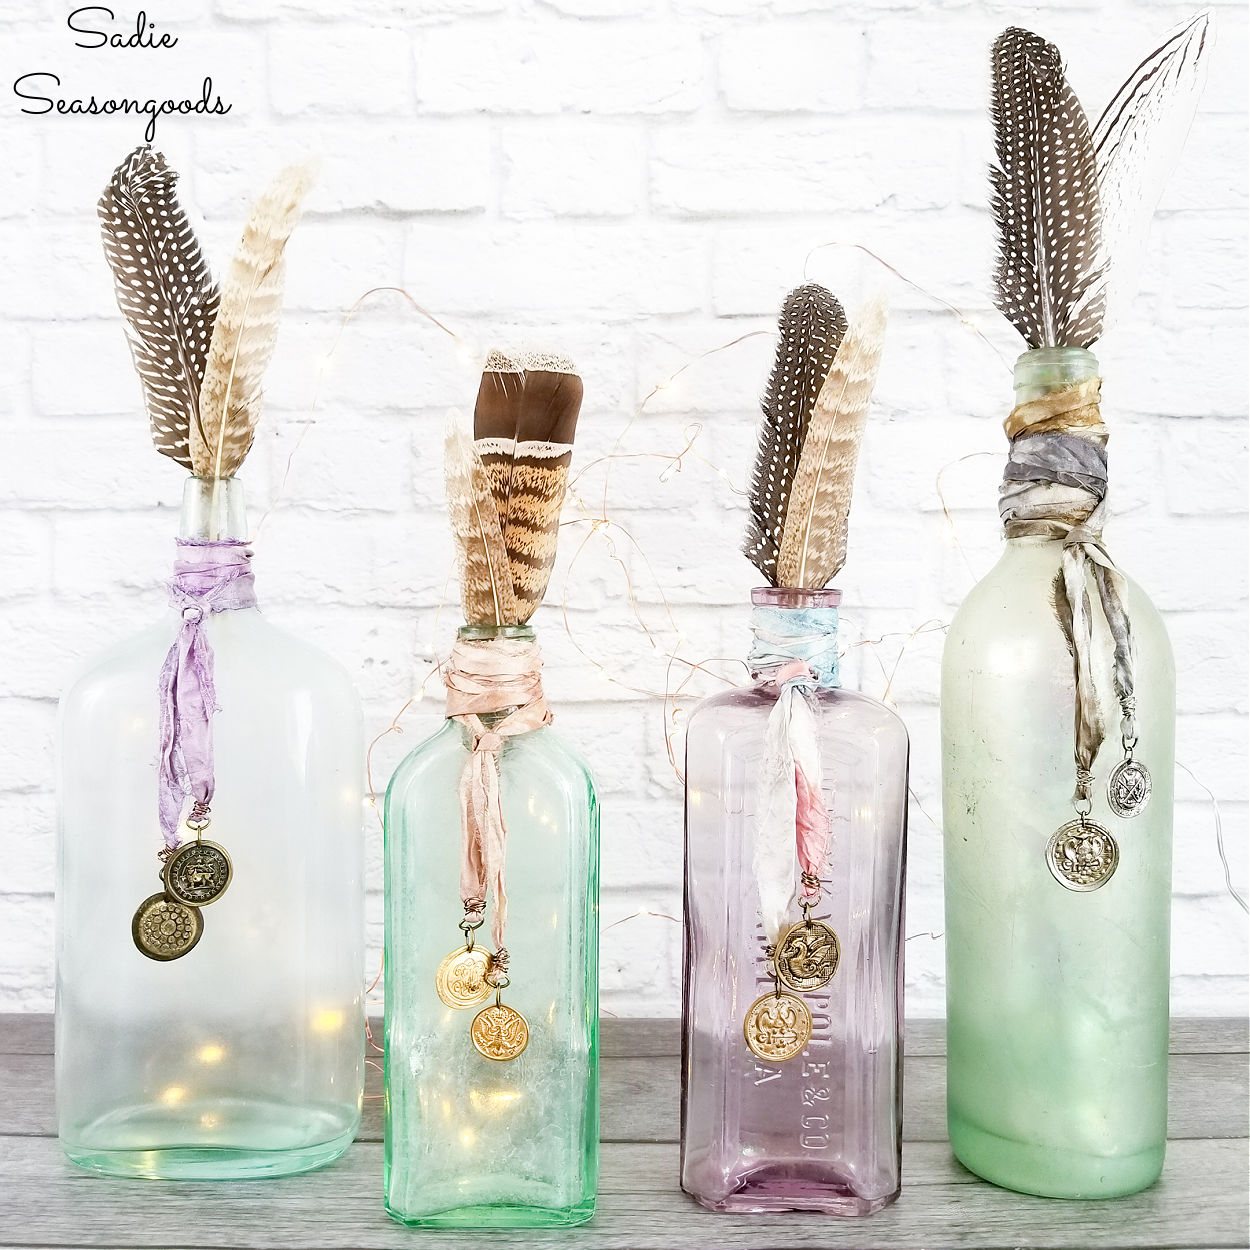 DIY Boho Decor with Bottle Charms from Metal Buttons